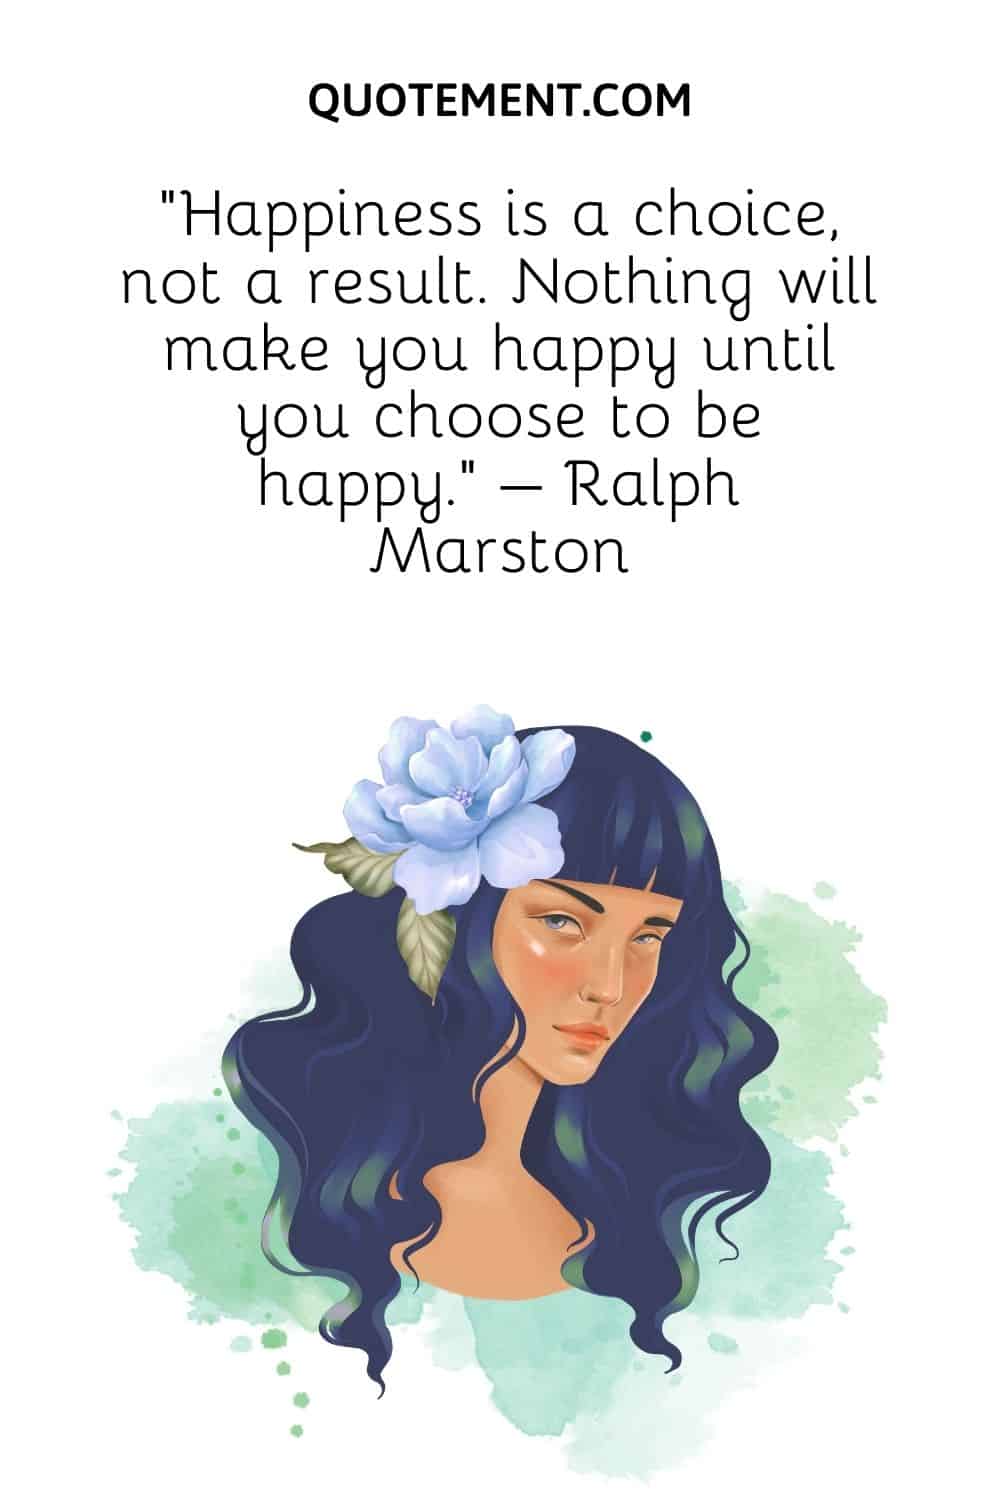 Happiness is a choice, not a result. Nothing will make you happy until you choose to be happy. – Ralph Marston